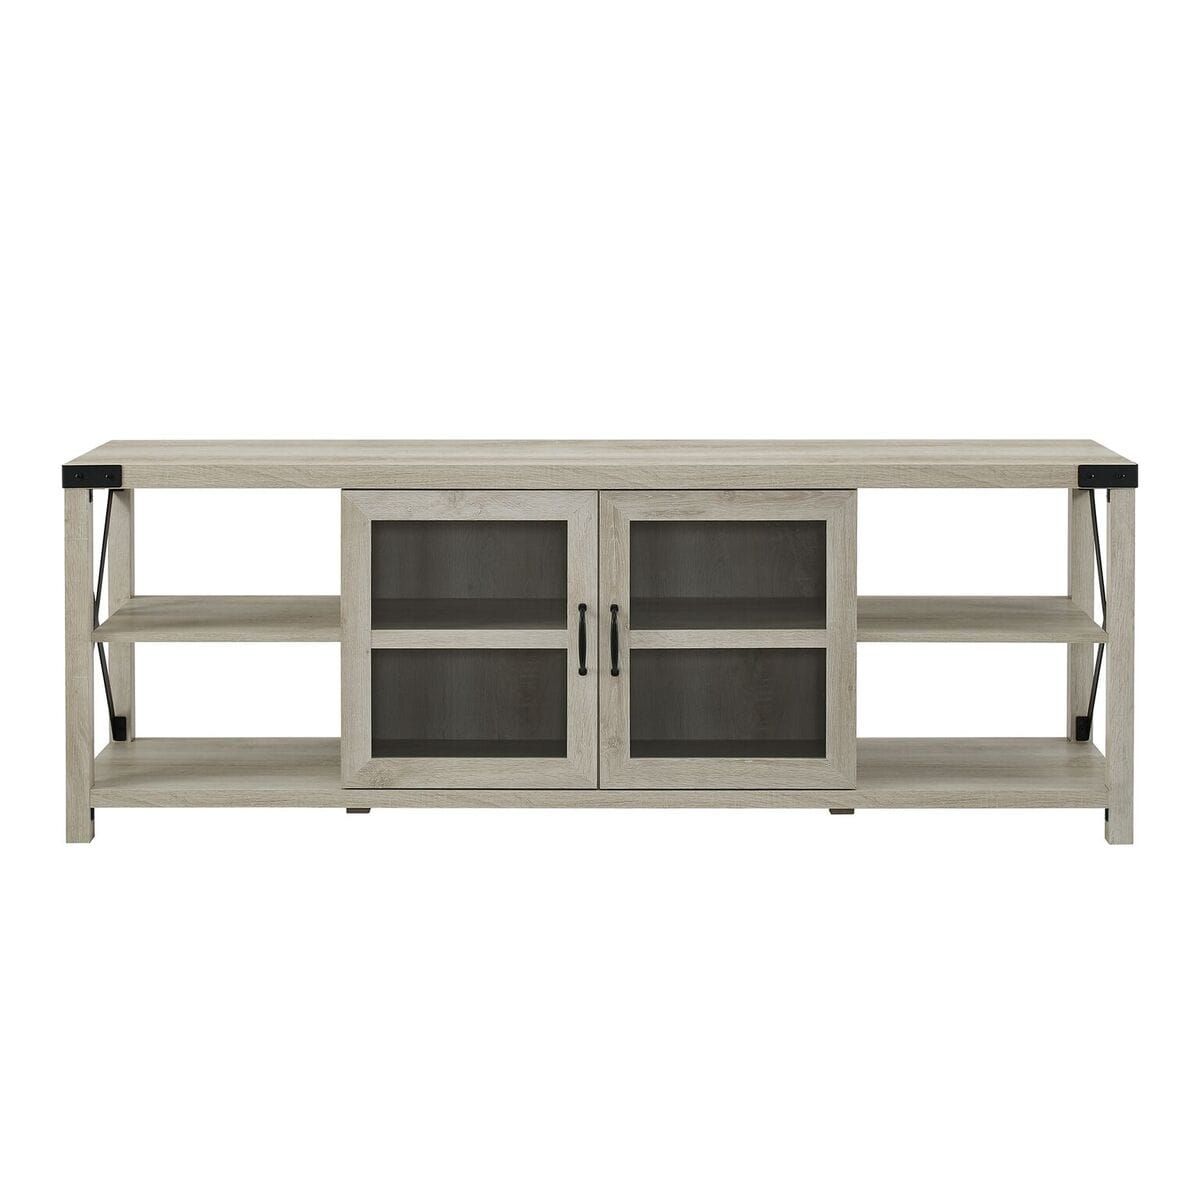 70 Inch Farmhouse Metal X Tv Stand – White Oakwalker Edison Throughout Farmhouse Tv Stands For 70 Inch Tv (View 16 of 20)